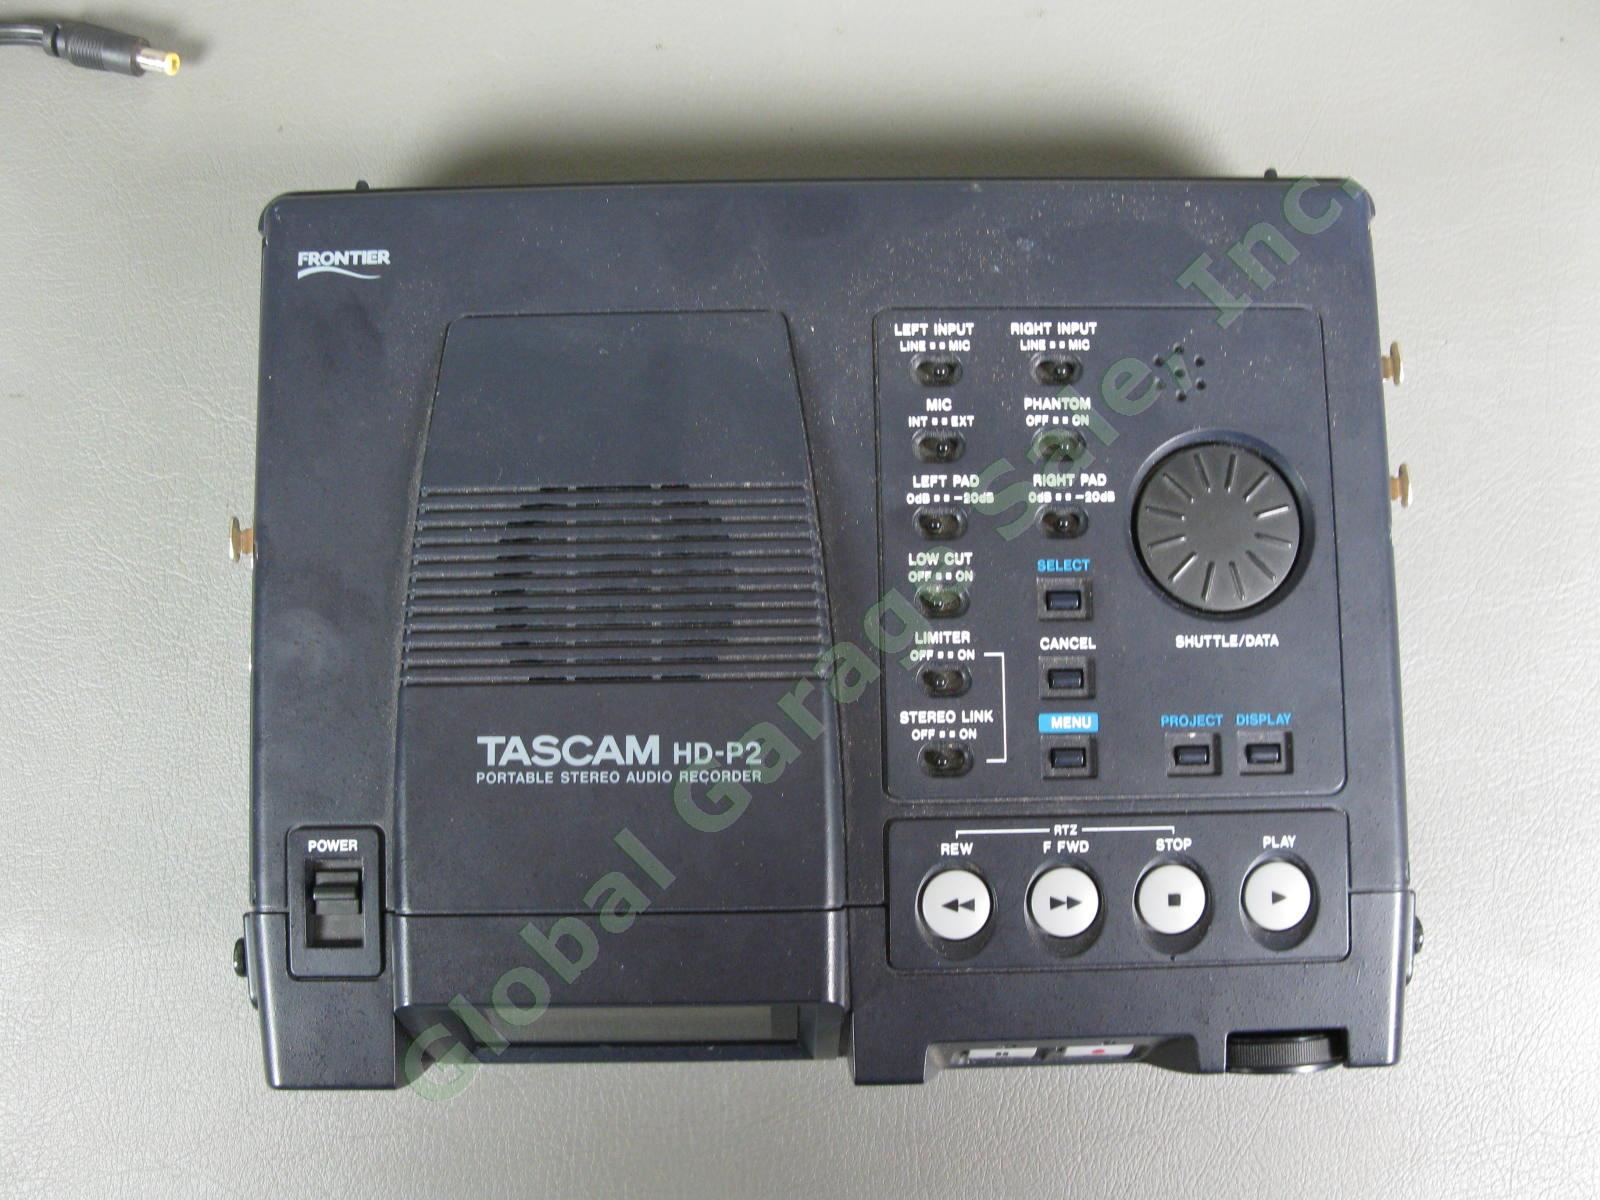 TASCAM Frontier HD-P2 Portable Stereo High Definition Multi Track Audio Recorder 3